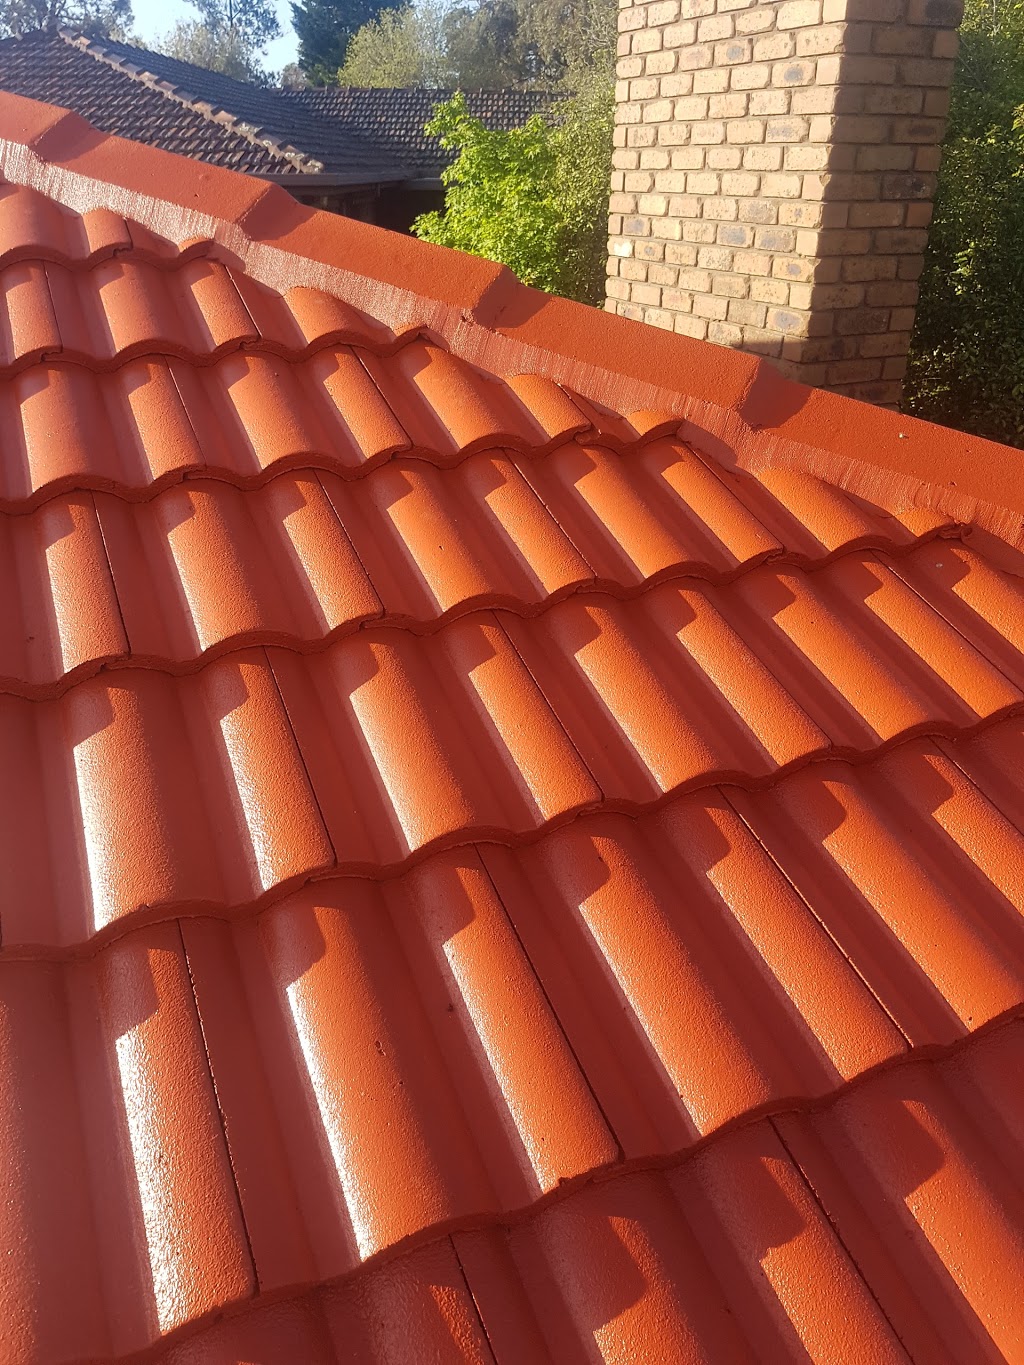 Brennans Roofing | roofing contractor | Hillside Park, Rowville VIC 3178, Australia | 0434101618 OR +61 434 101 618